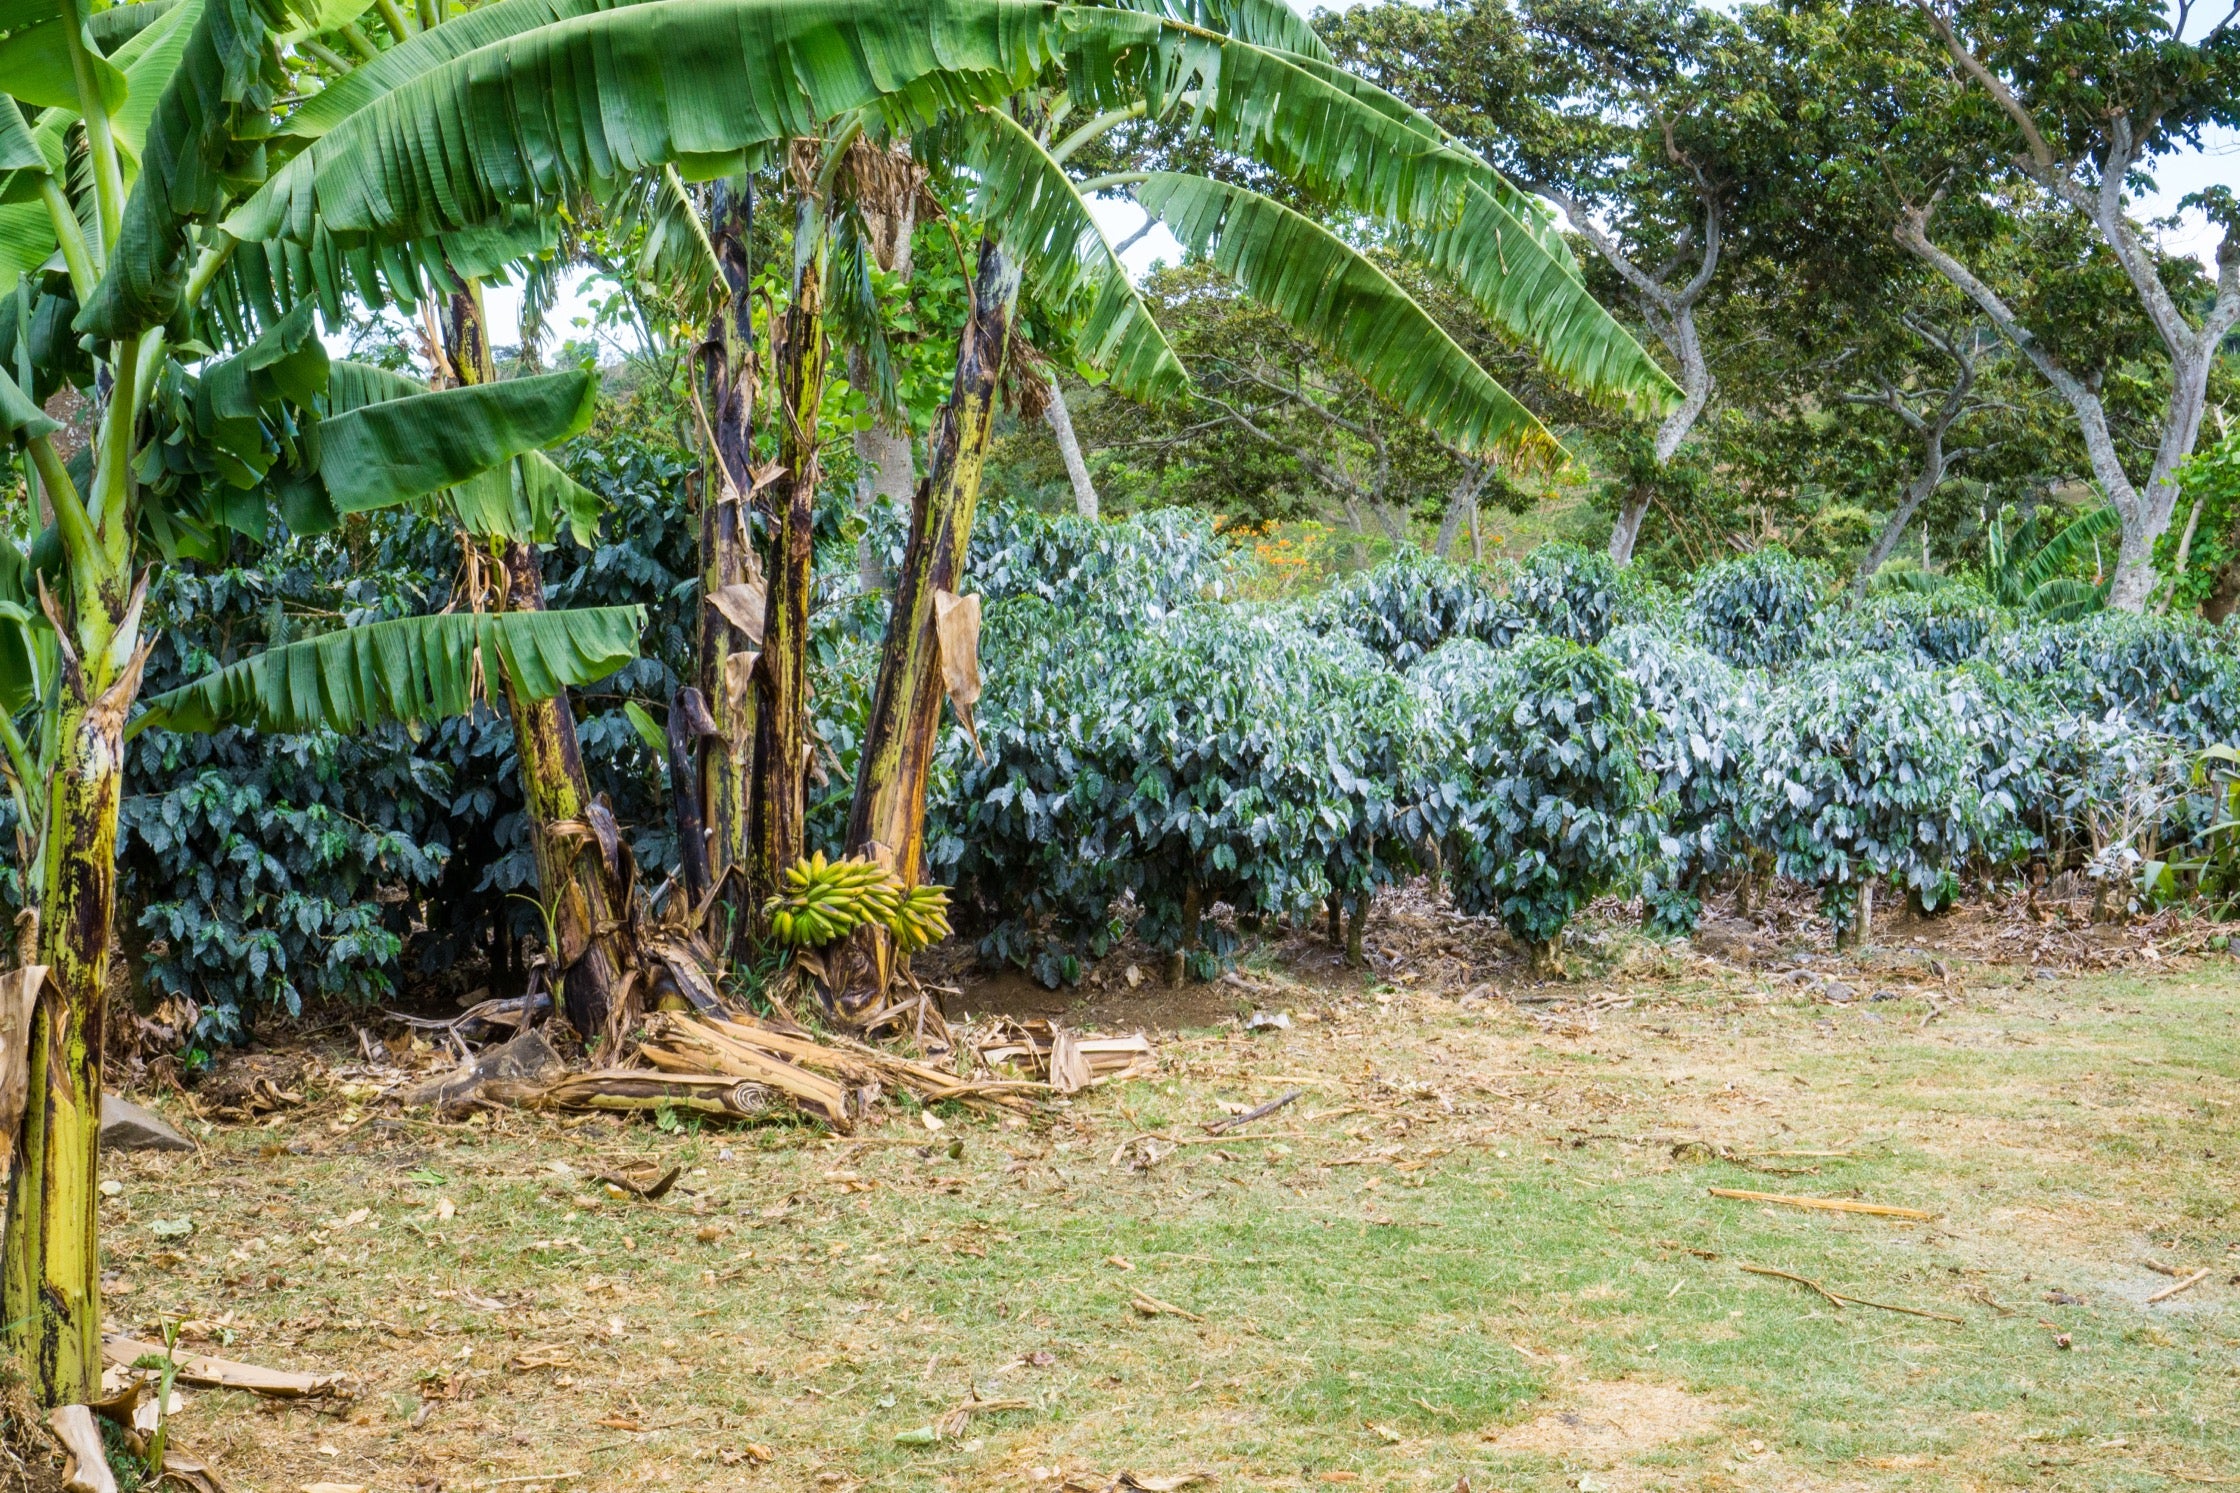 Plantain and banana trees planted near coffee crops